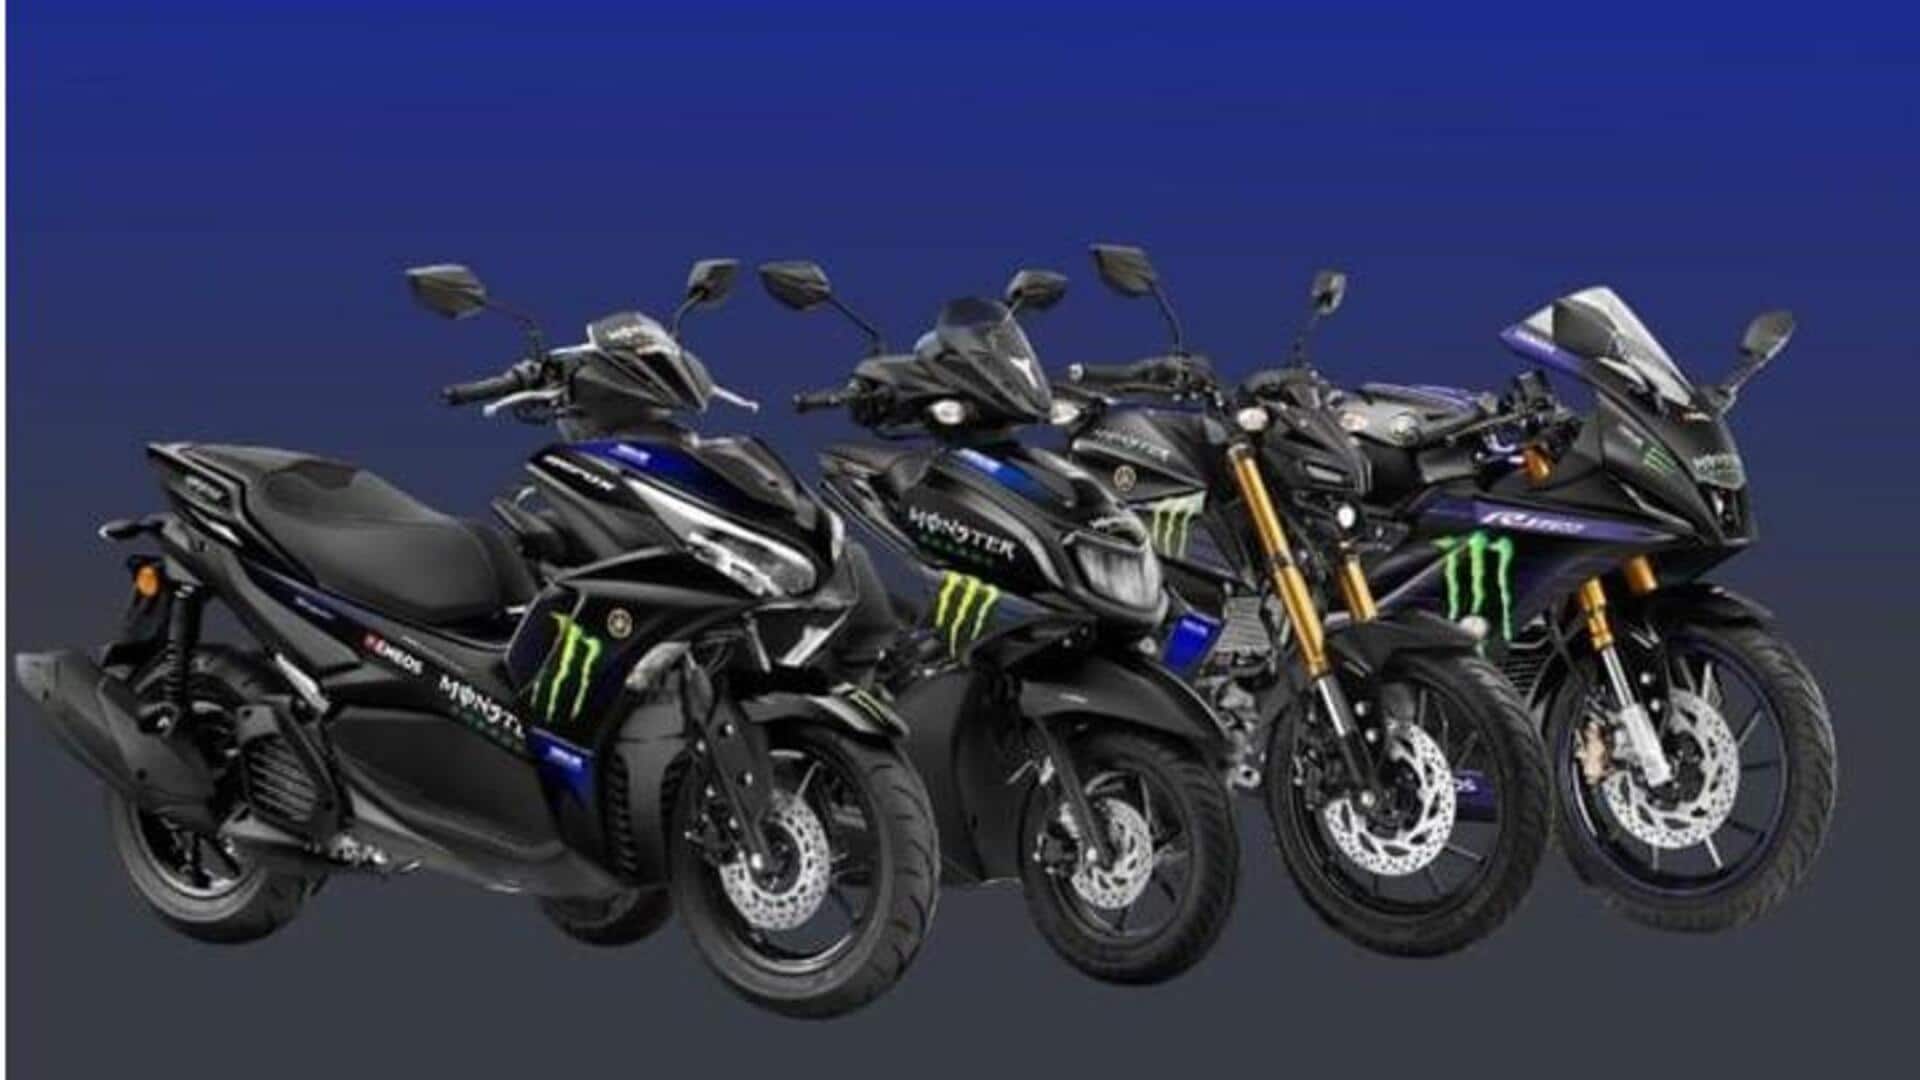 Yamaha unveils 2023 Monster Energy MotoGP Edition line-up: Check features